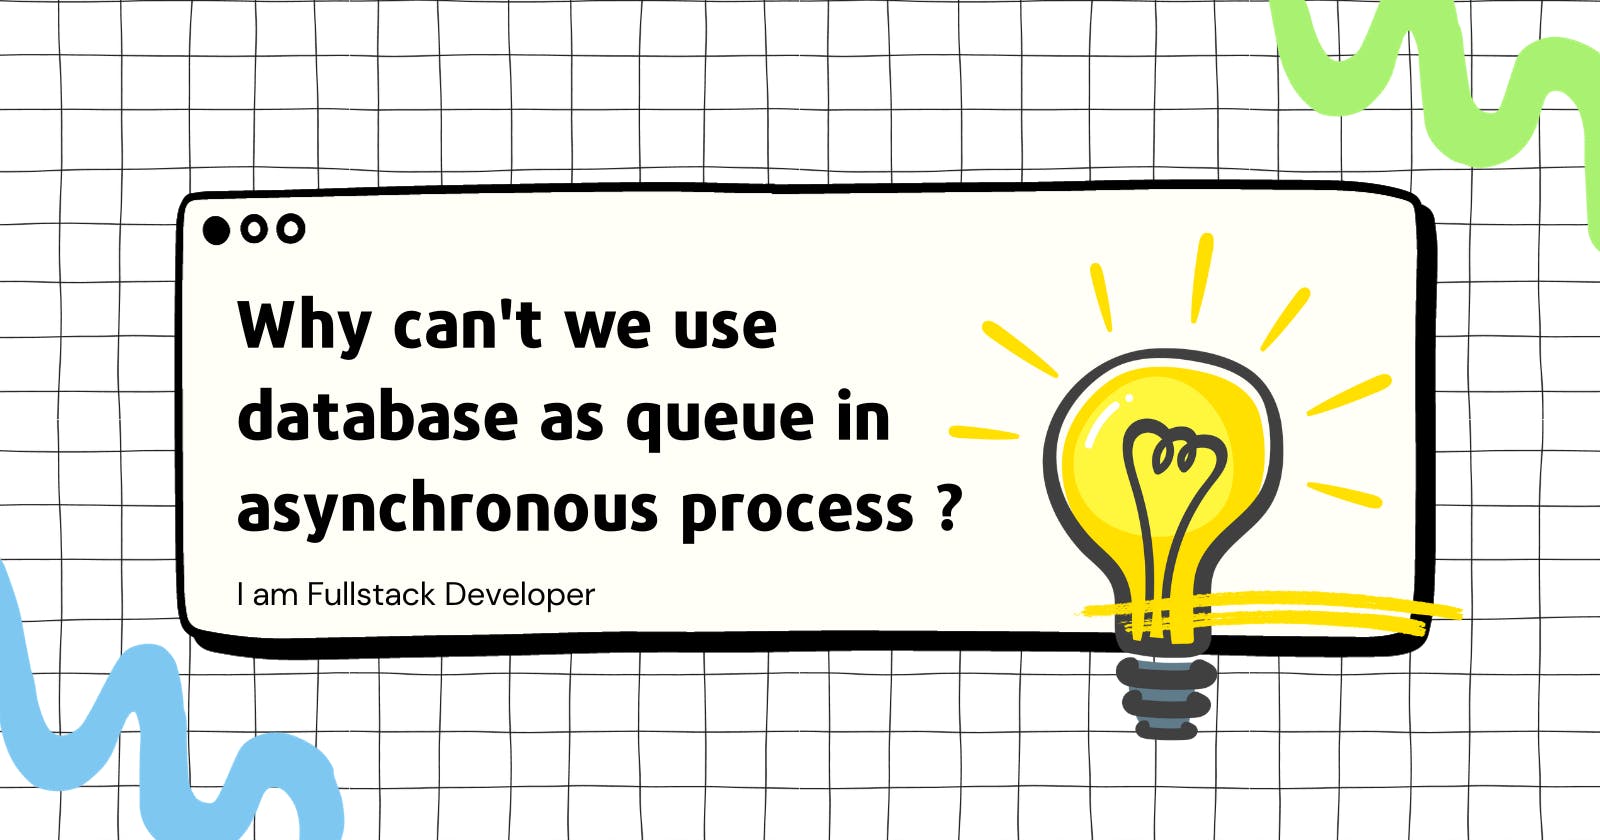 Why can't we use database as queue in asynchronous process ?